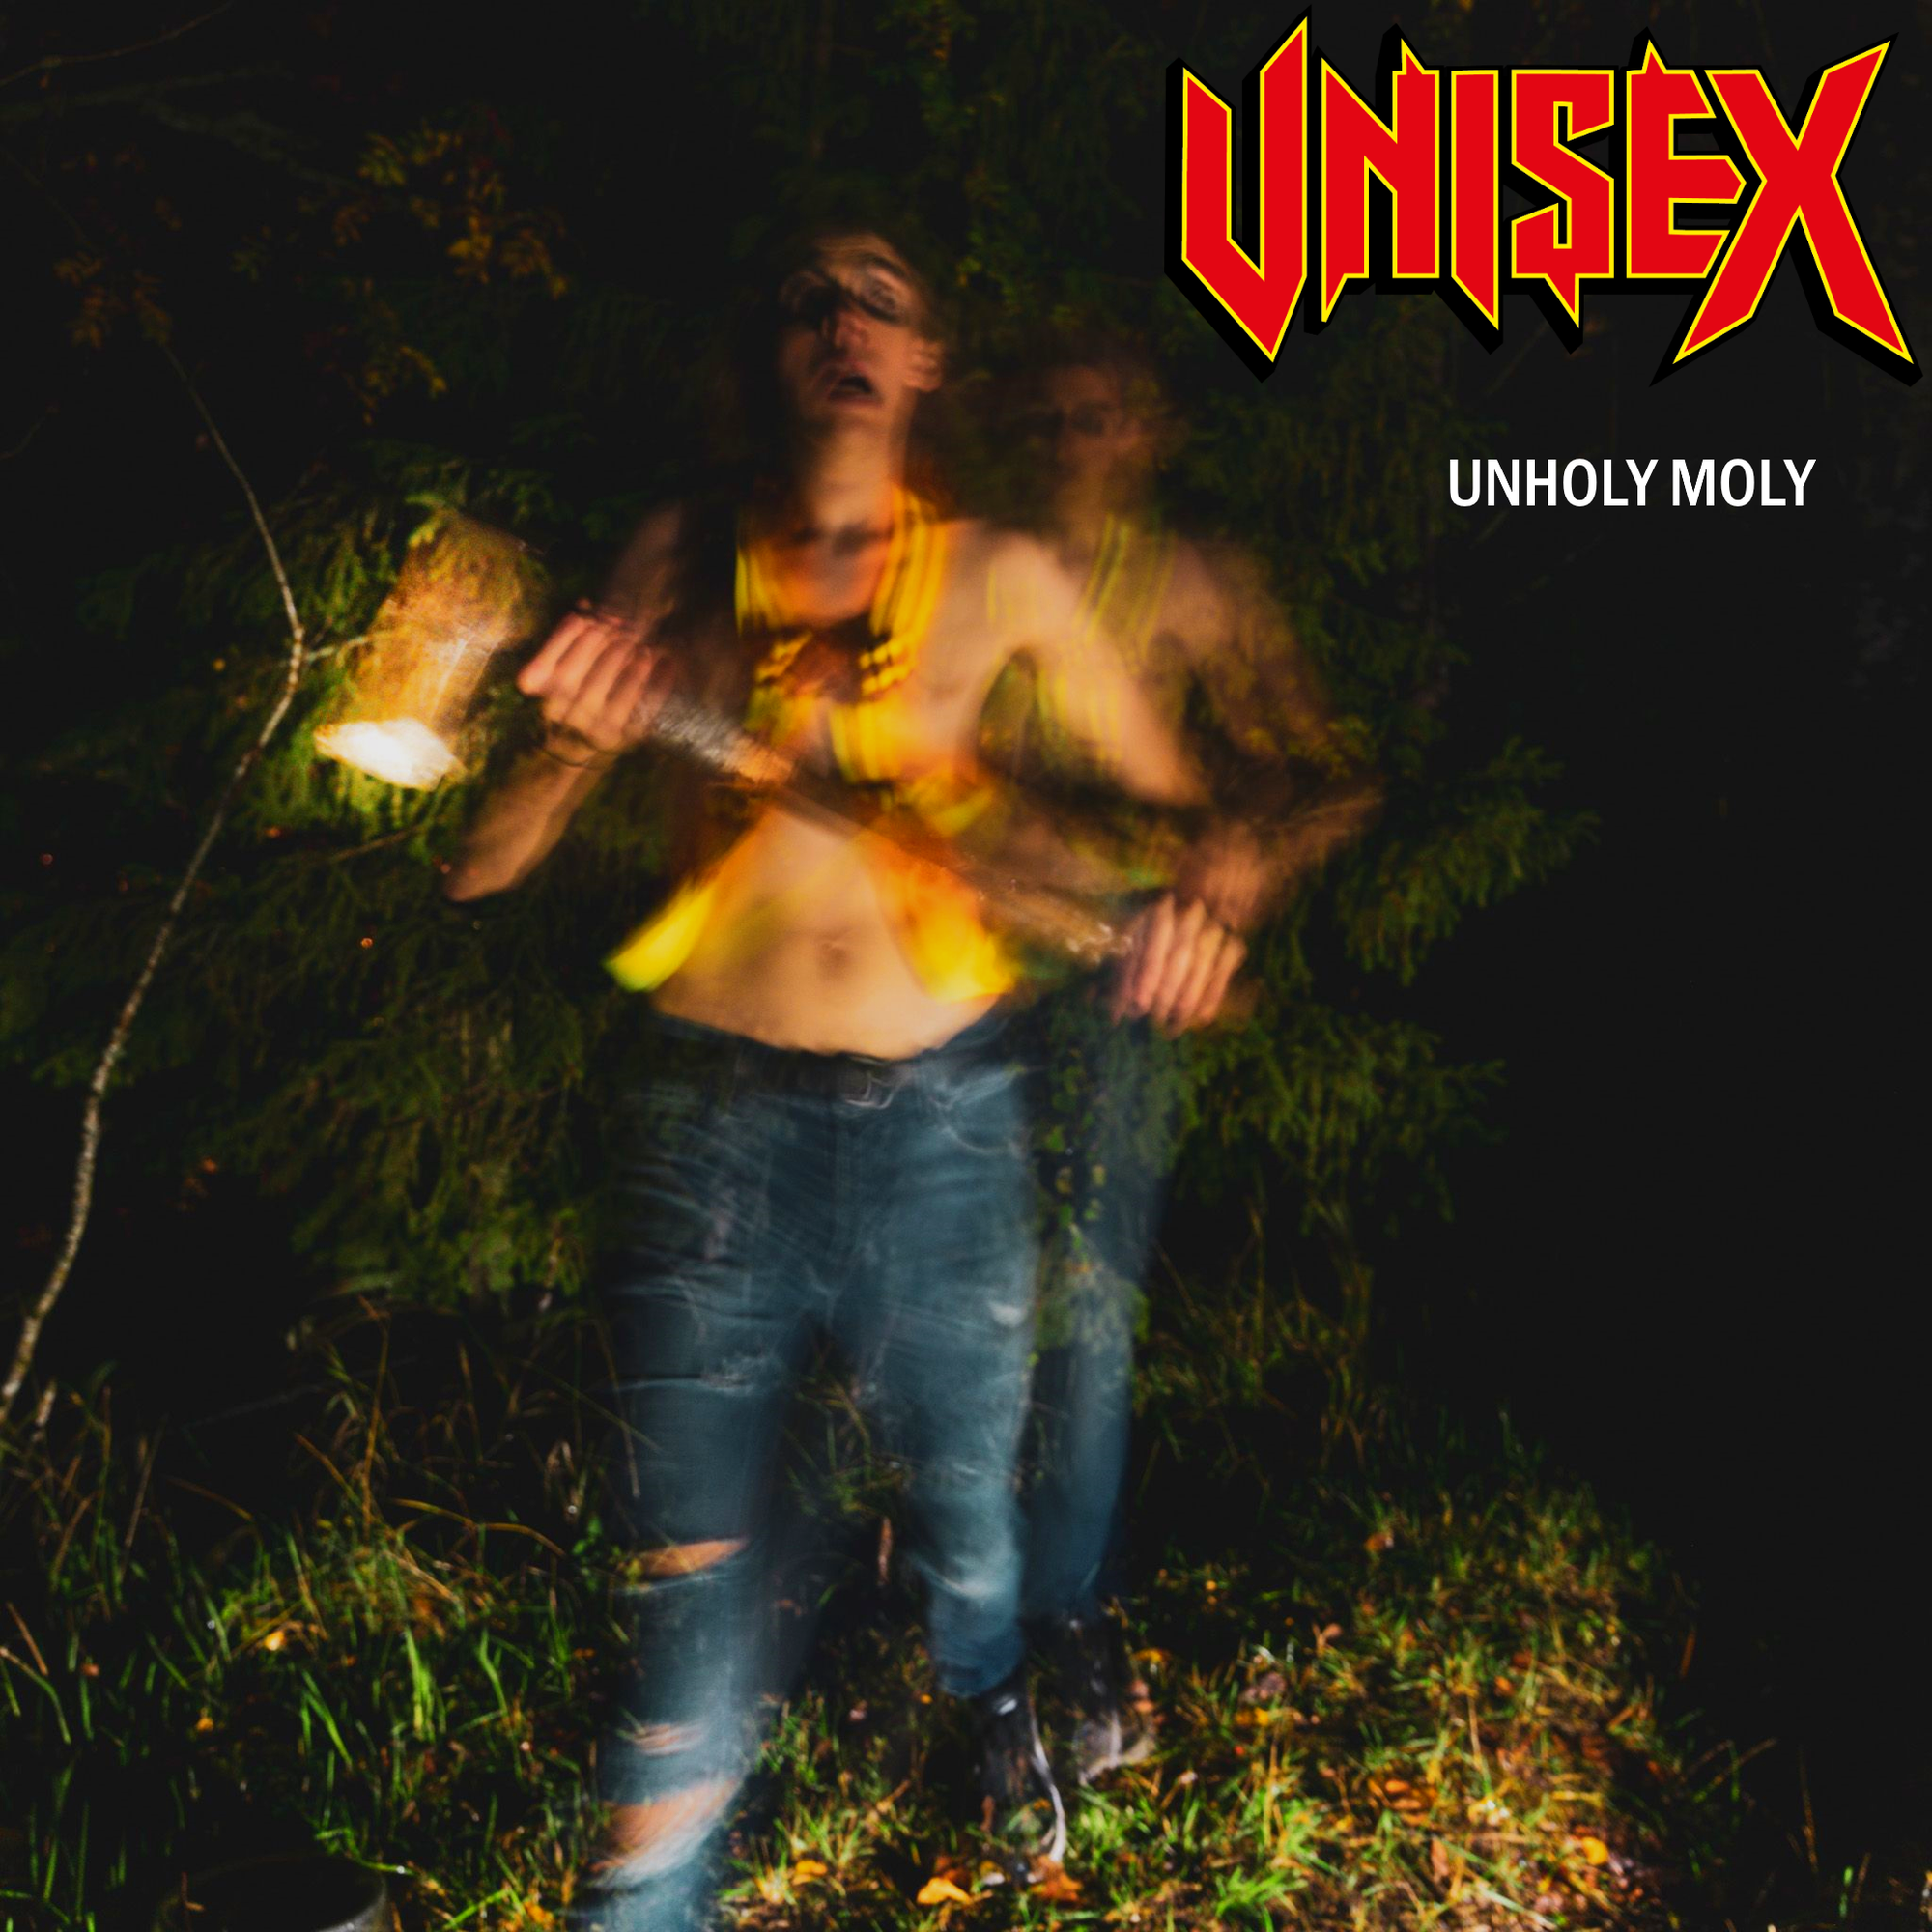 Interview with UNISEX